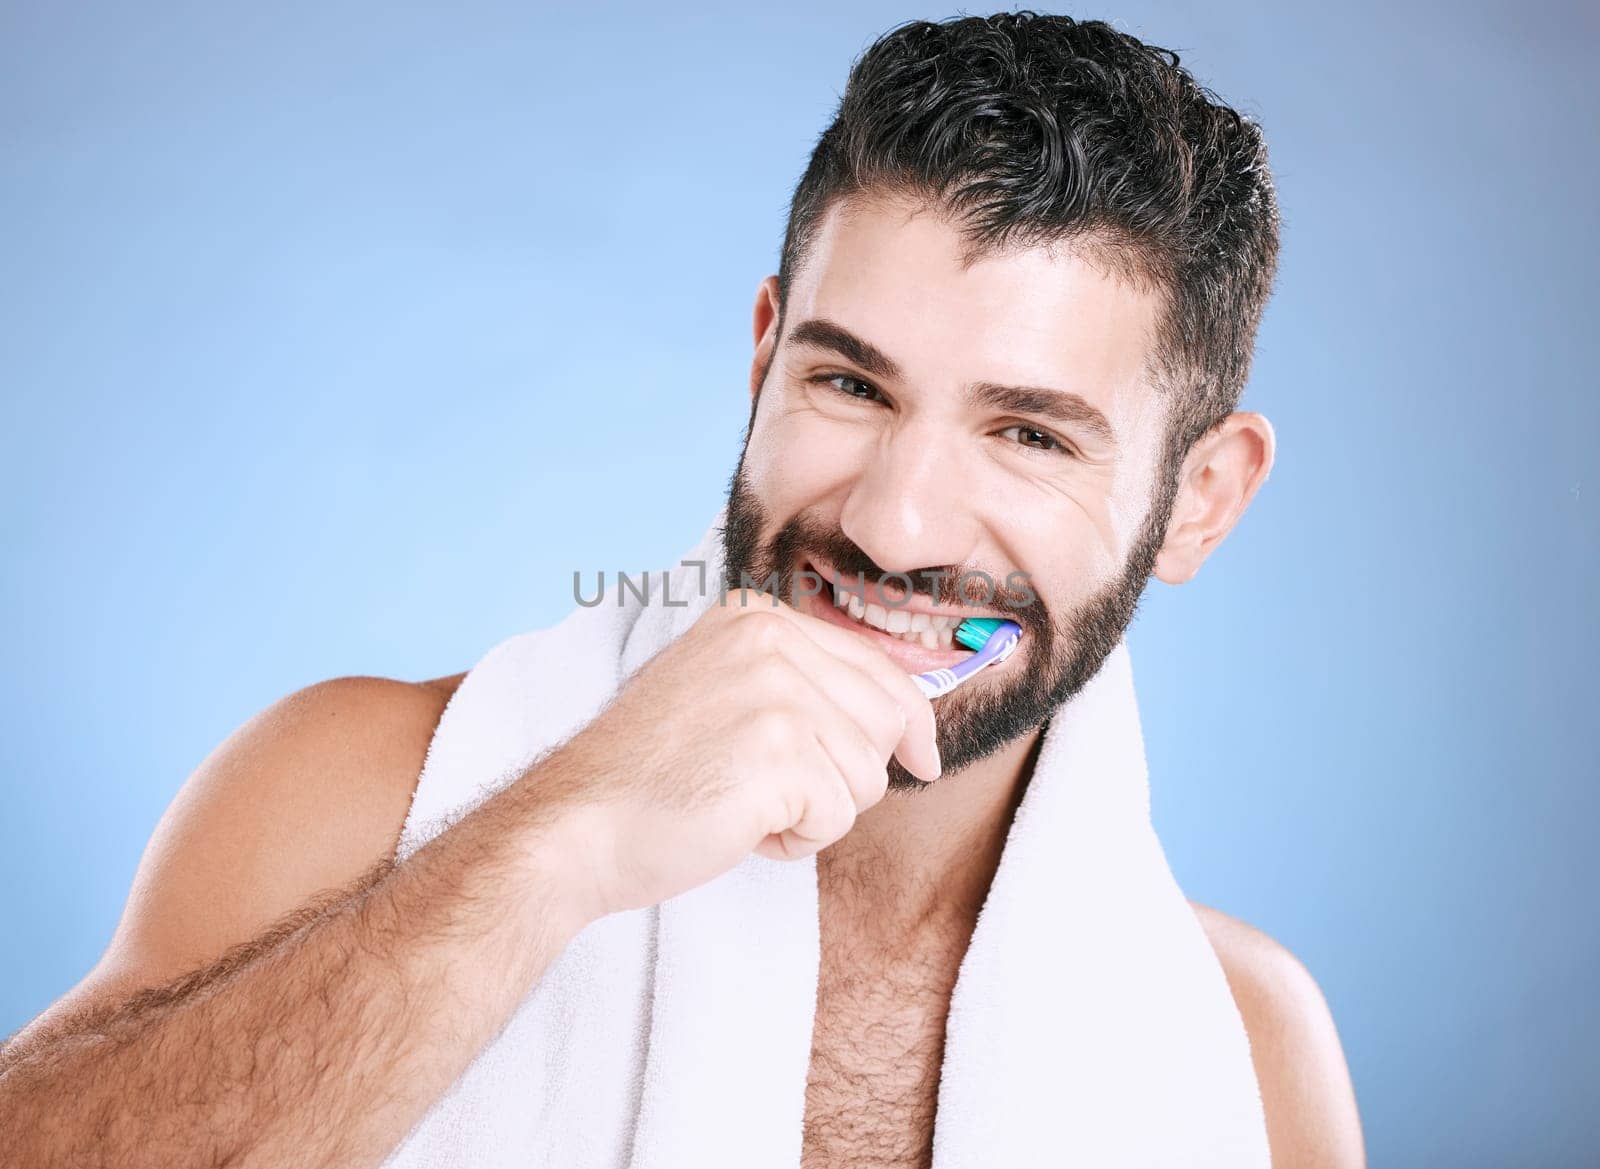 Toothbrush, portrait and man brushing teeth in studio for dental wellness, healthy smile and mouth. Happy male model, oral care and fresh breath for gums, dentistry and hygiene on blue background.